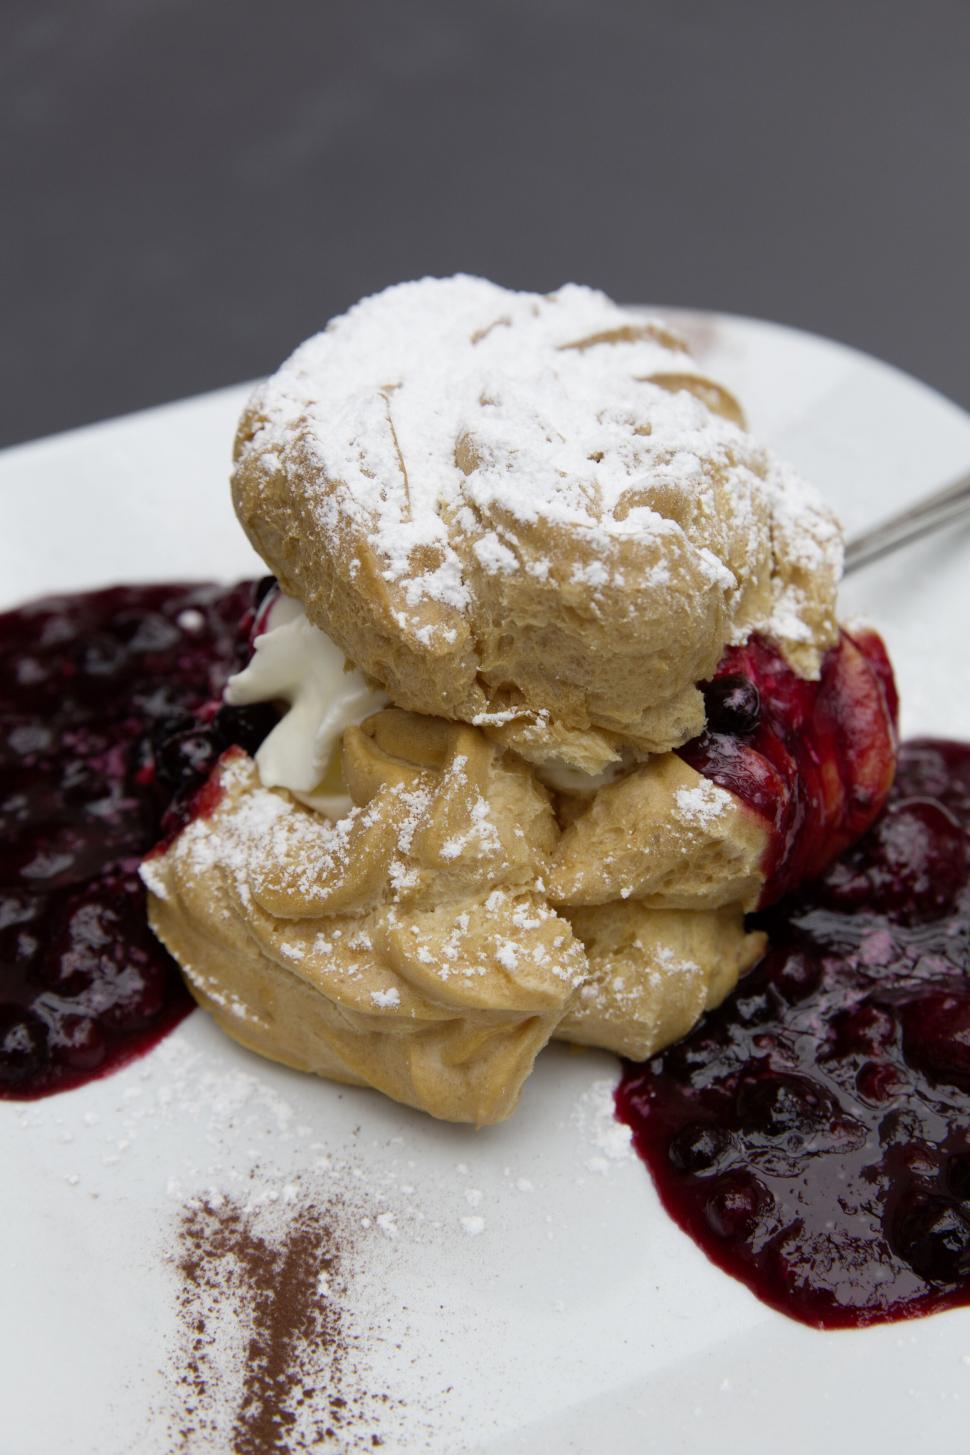 Free Image of Delicious cream puff dessert on plate 